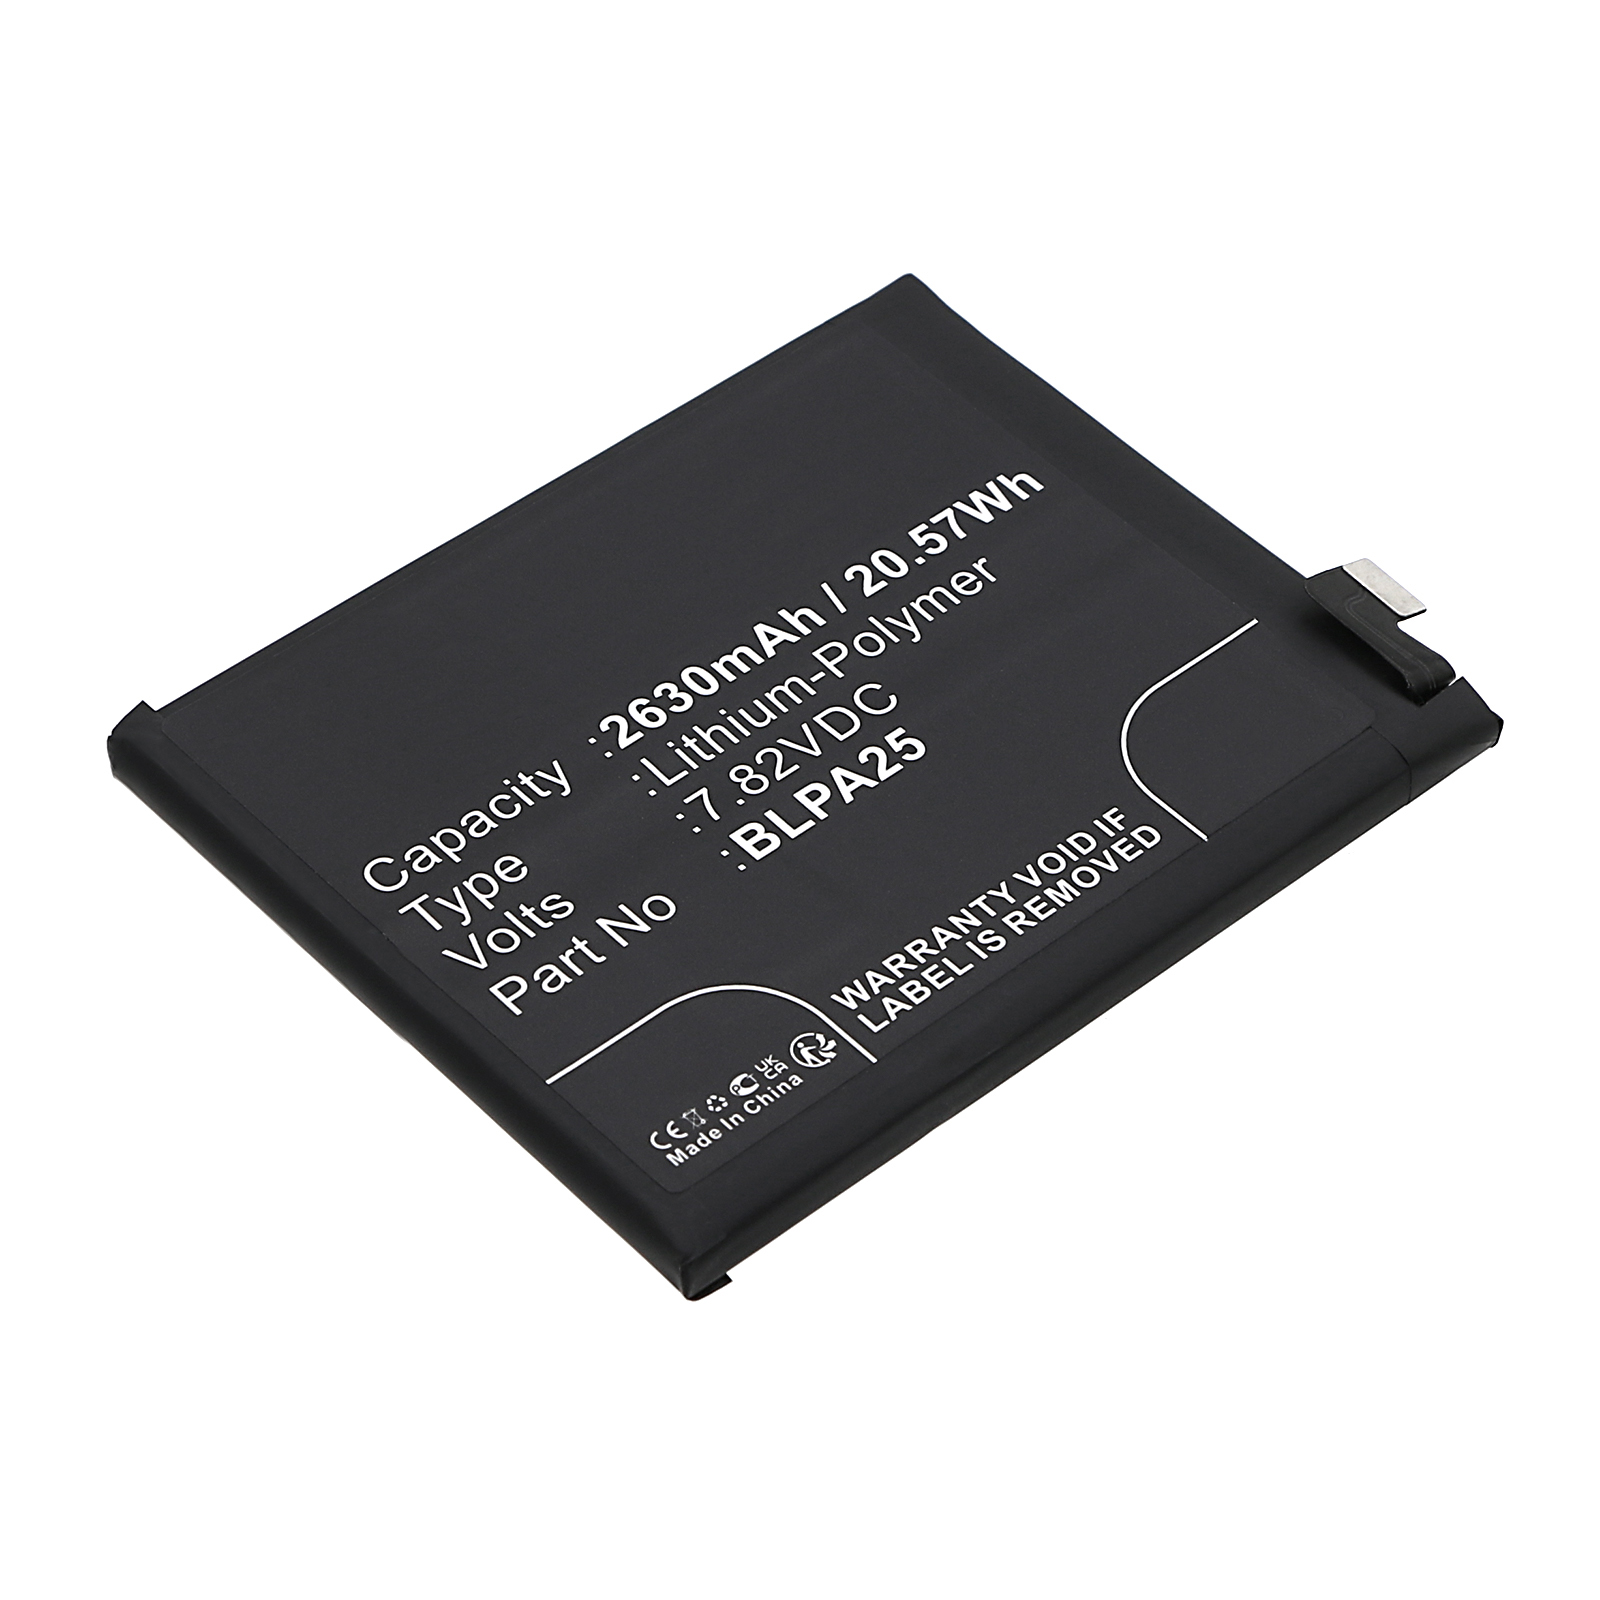 Synergy Digital Cell Phone Battery, Compatible with Oneplus BLPA25 Cell Phone Battery (Li-Pol, 7.82V, 2630mAh)